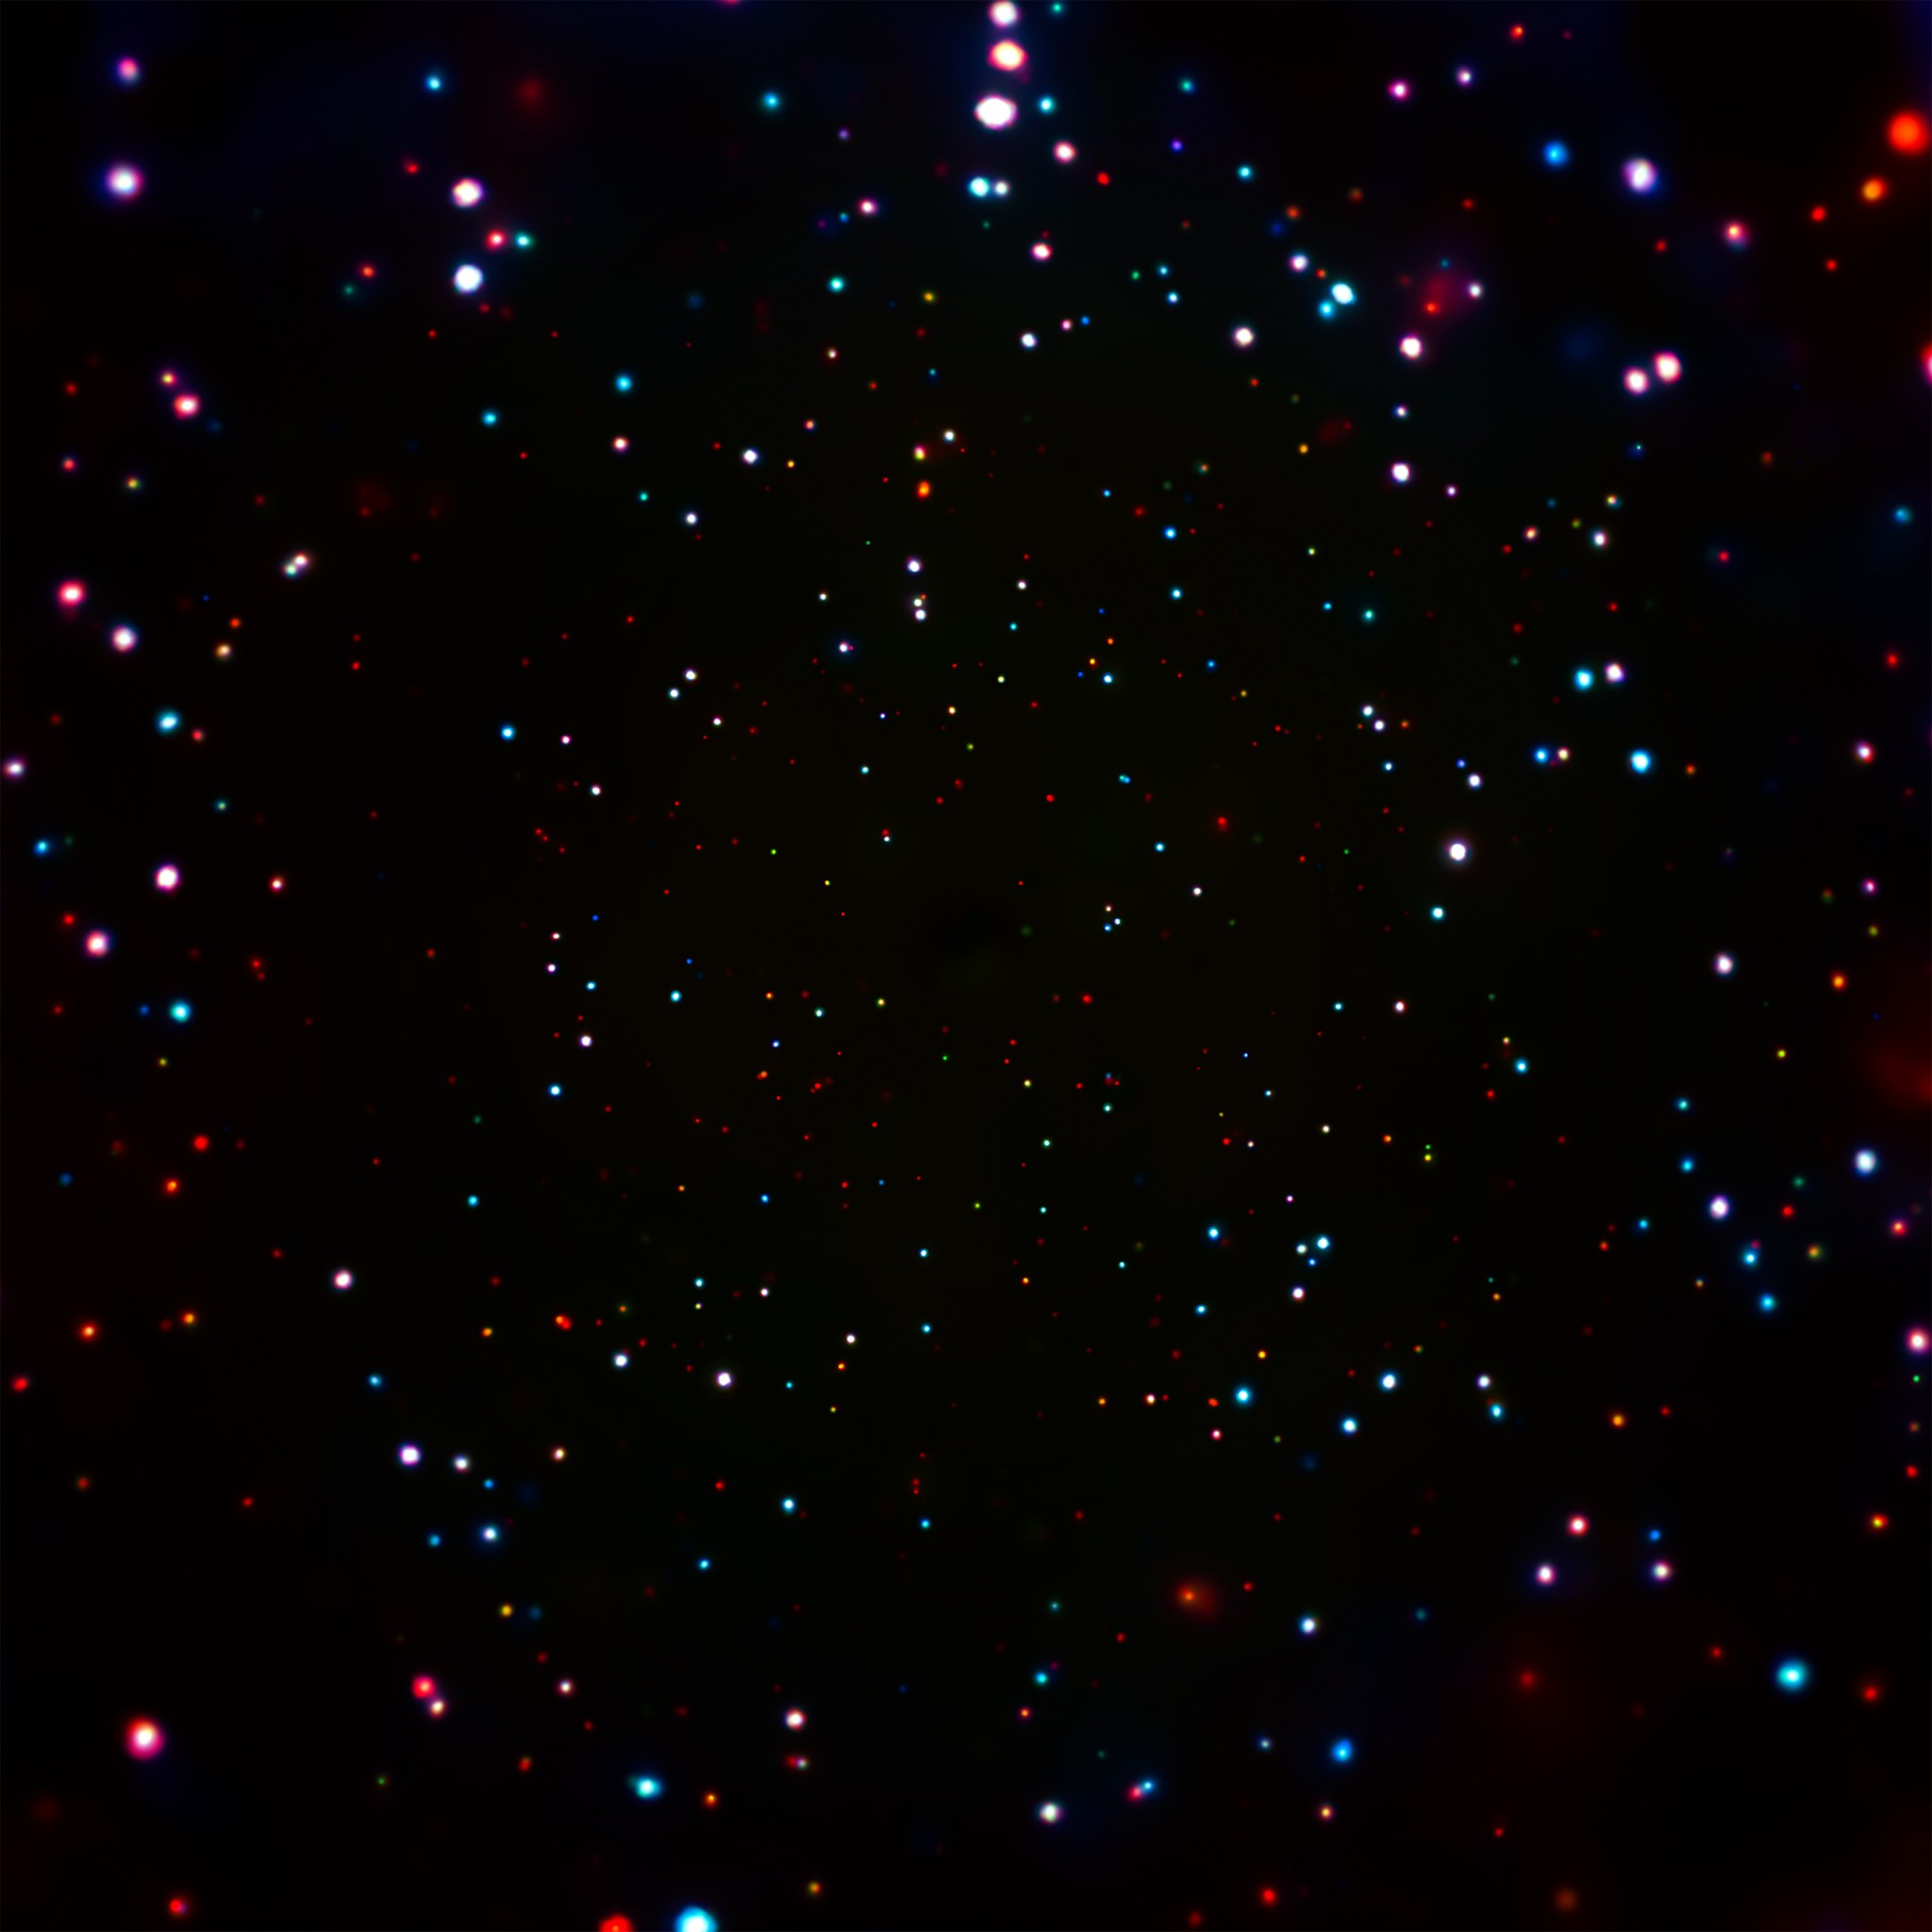 Chandra Deep Field-South: The deepest X-ray image, containing objects at a distance of nearly 13 billion light years. 